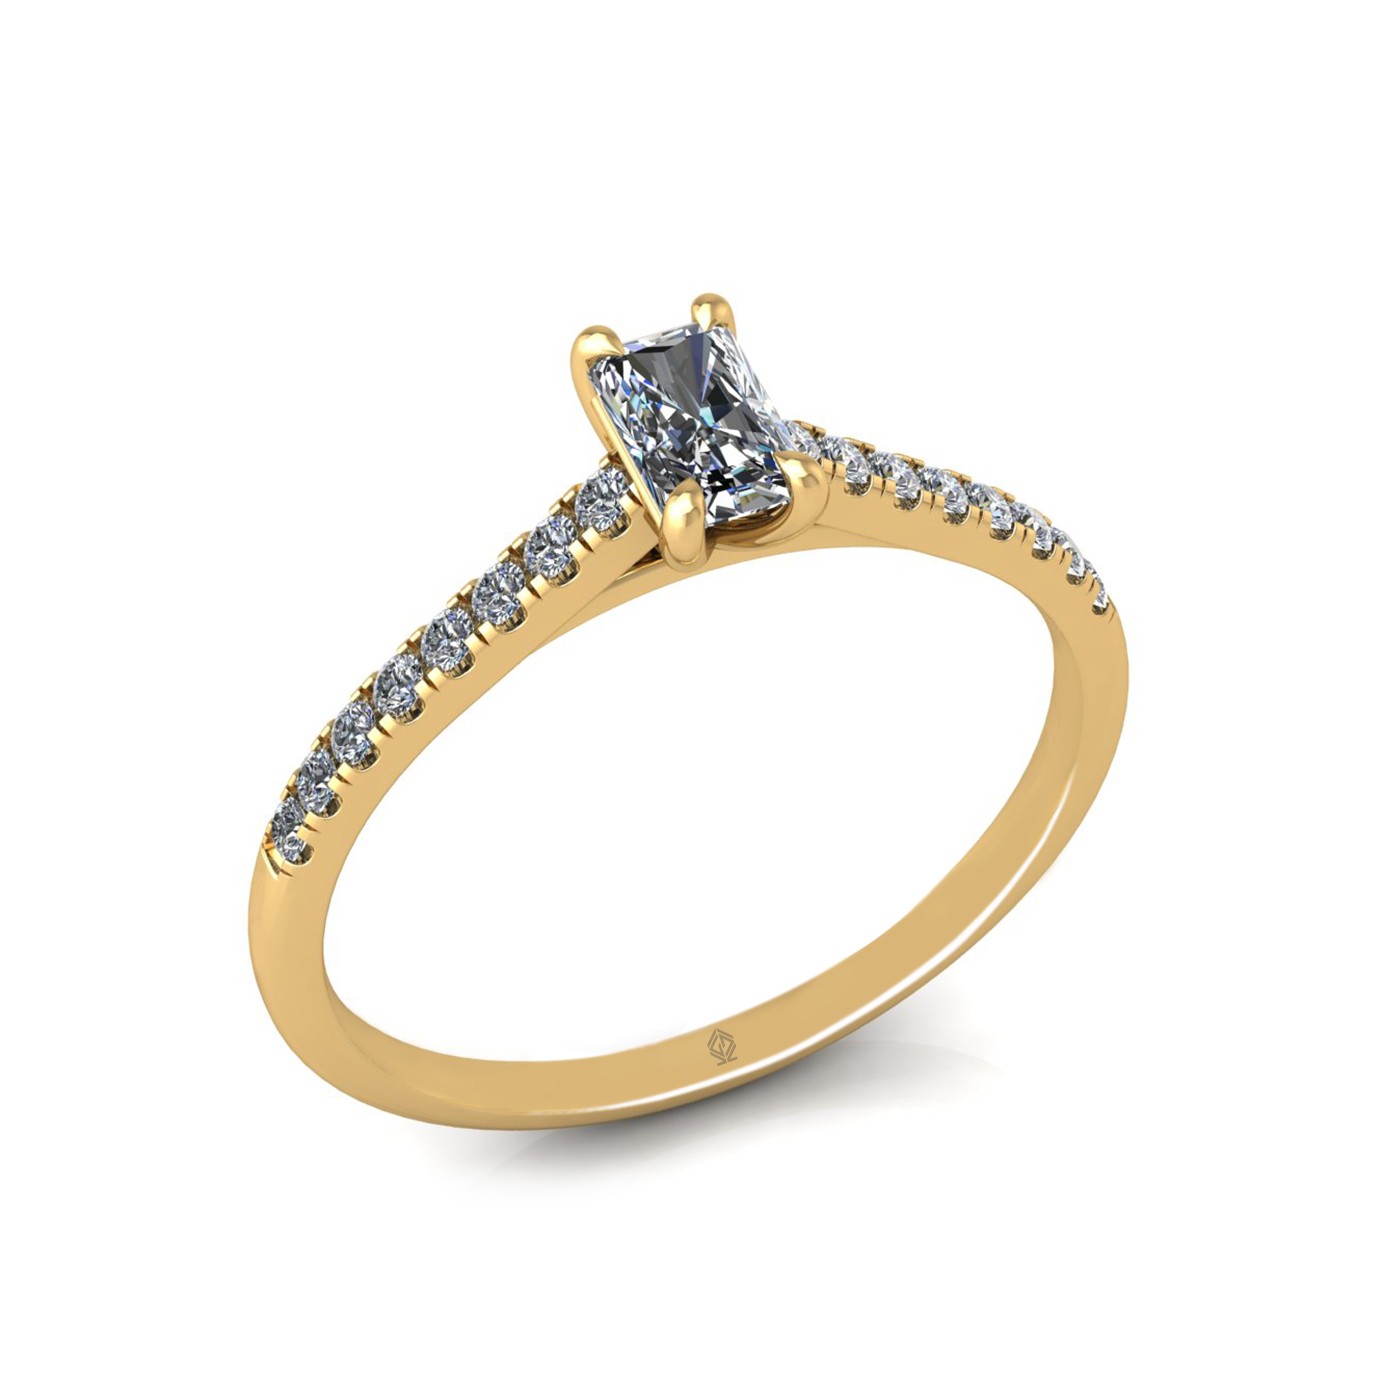 18k yellow gold  0,30 ct 4 prongs radiant cut diamond engagement ring with whisper thin pavÉ set band